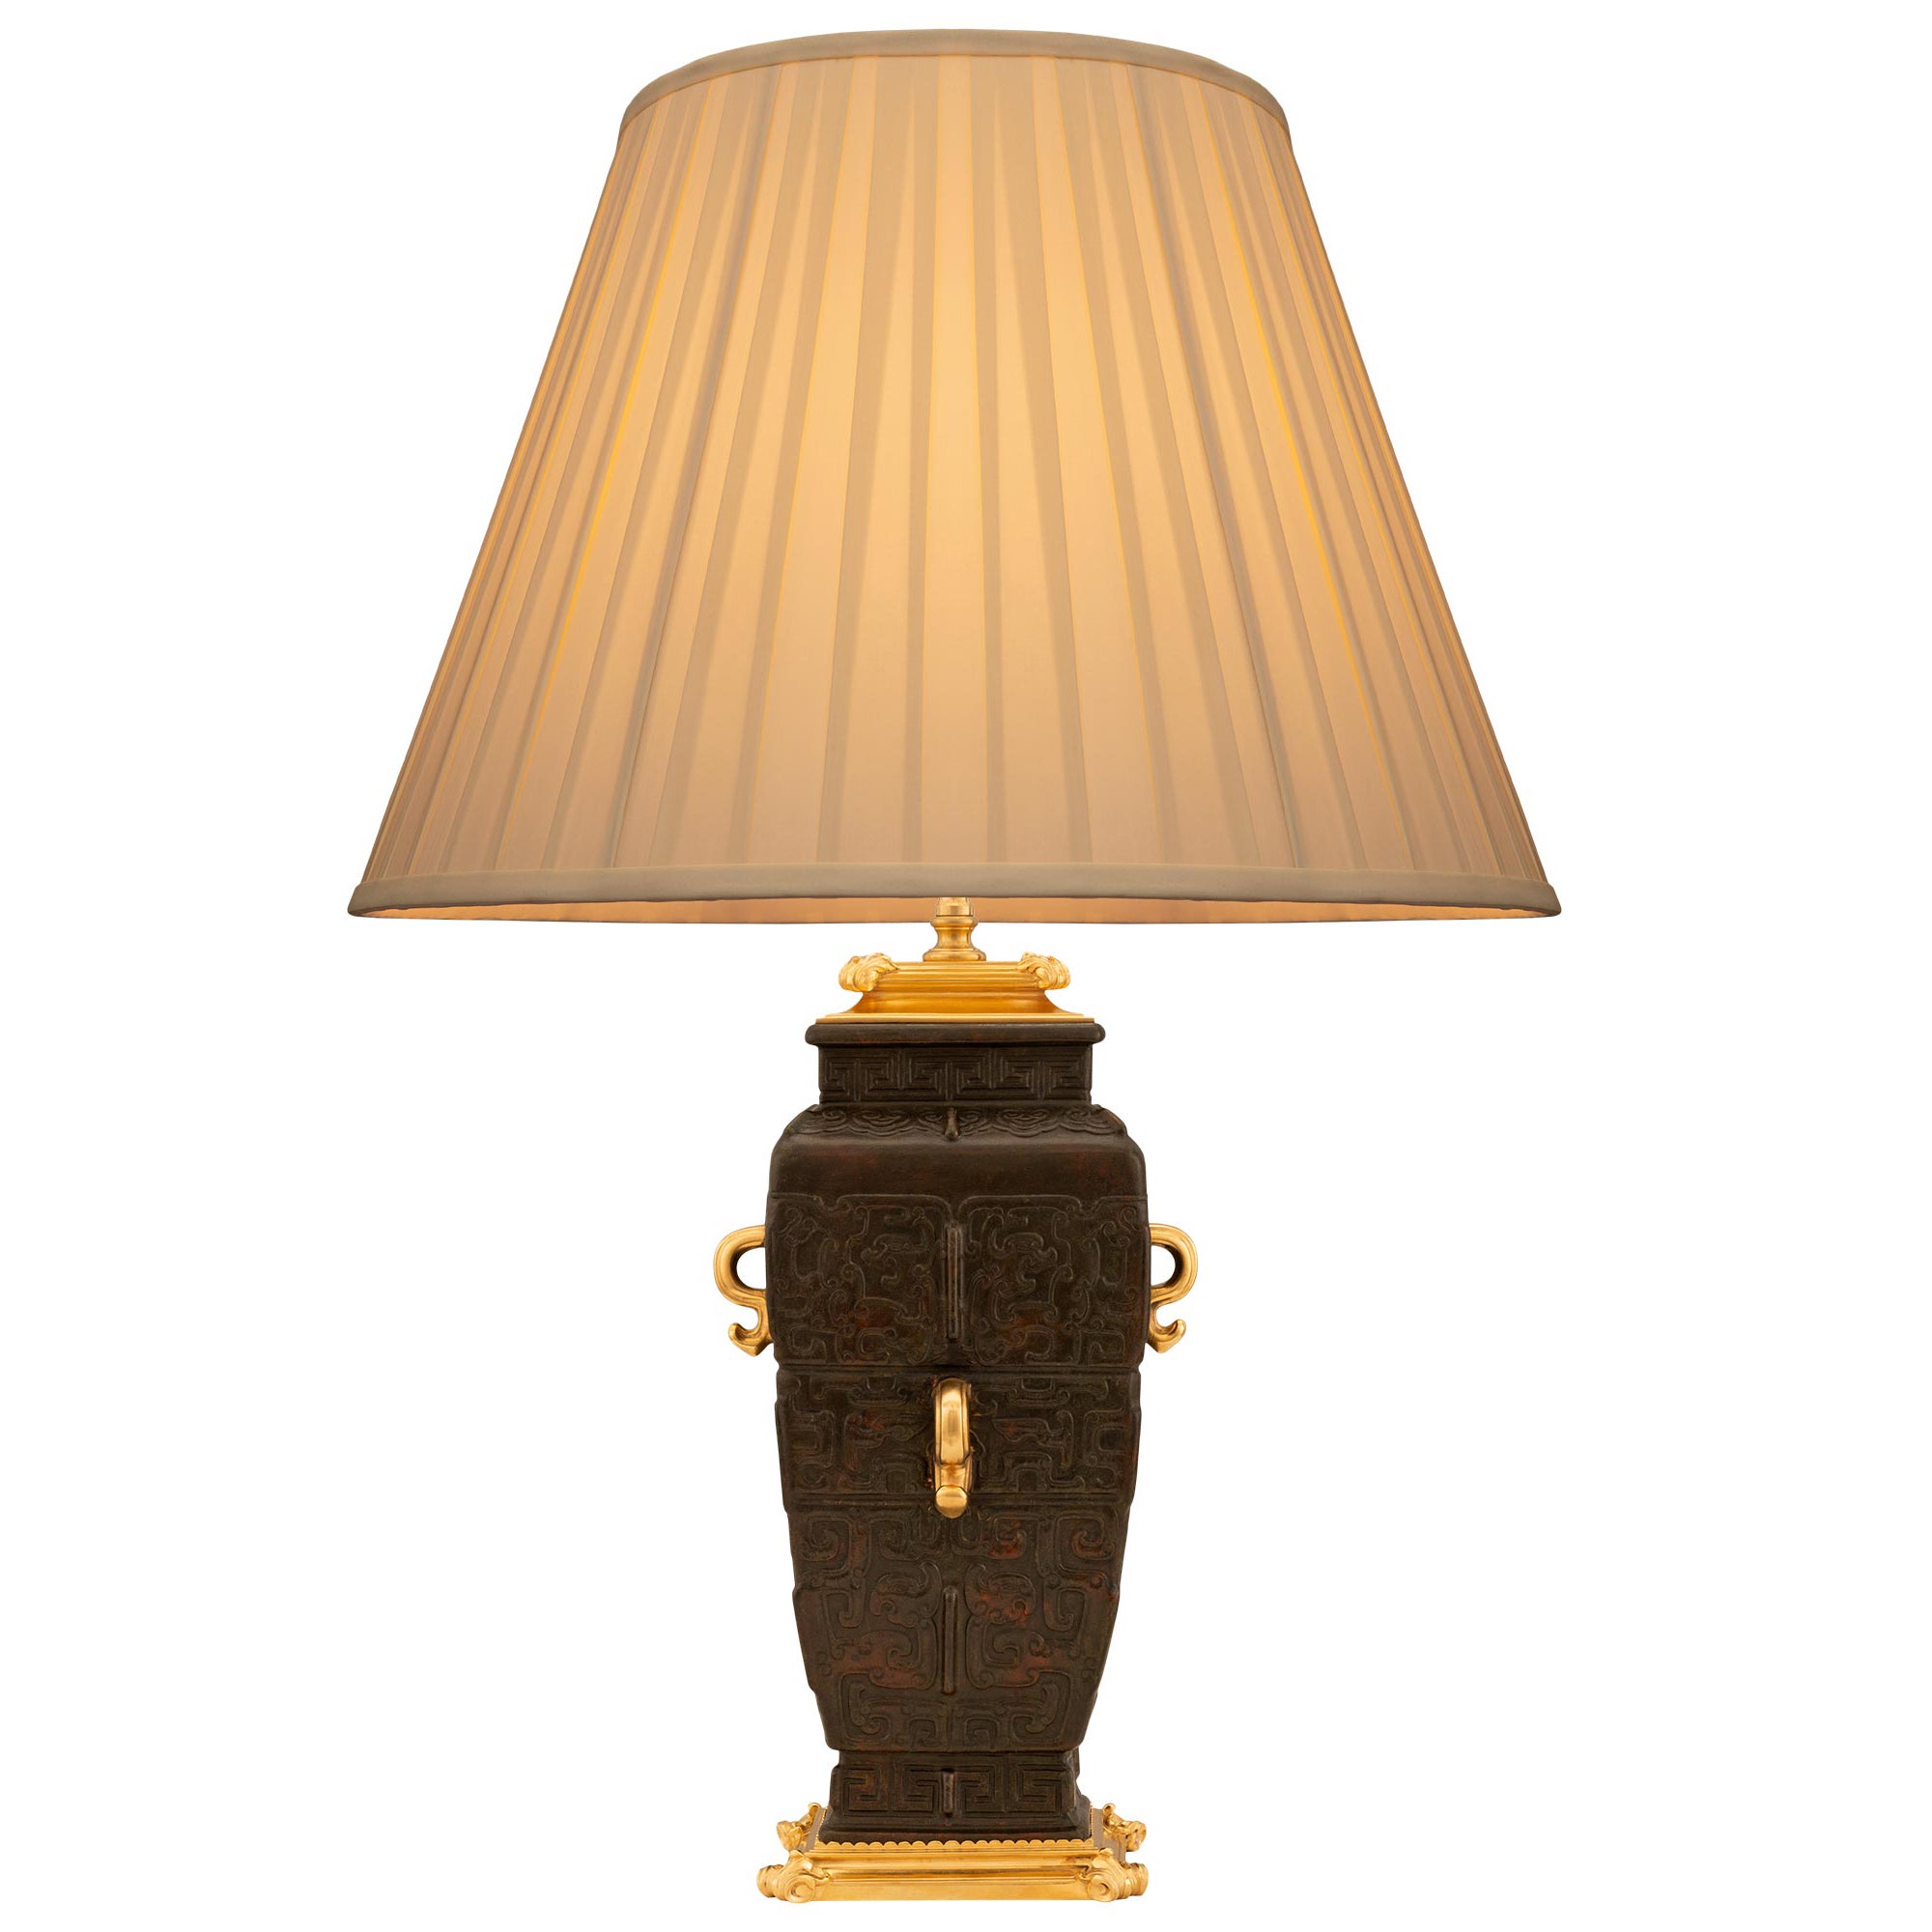 American 19th Century Patinated Bronze and Ormolu Lamp by E.F. Caldwell & Co. For Sale